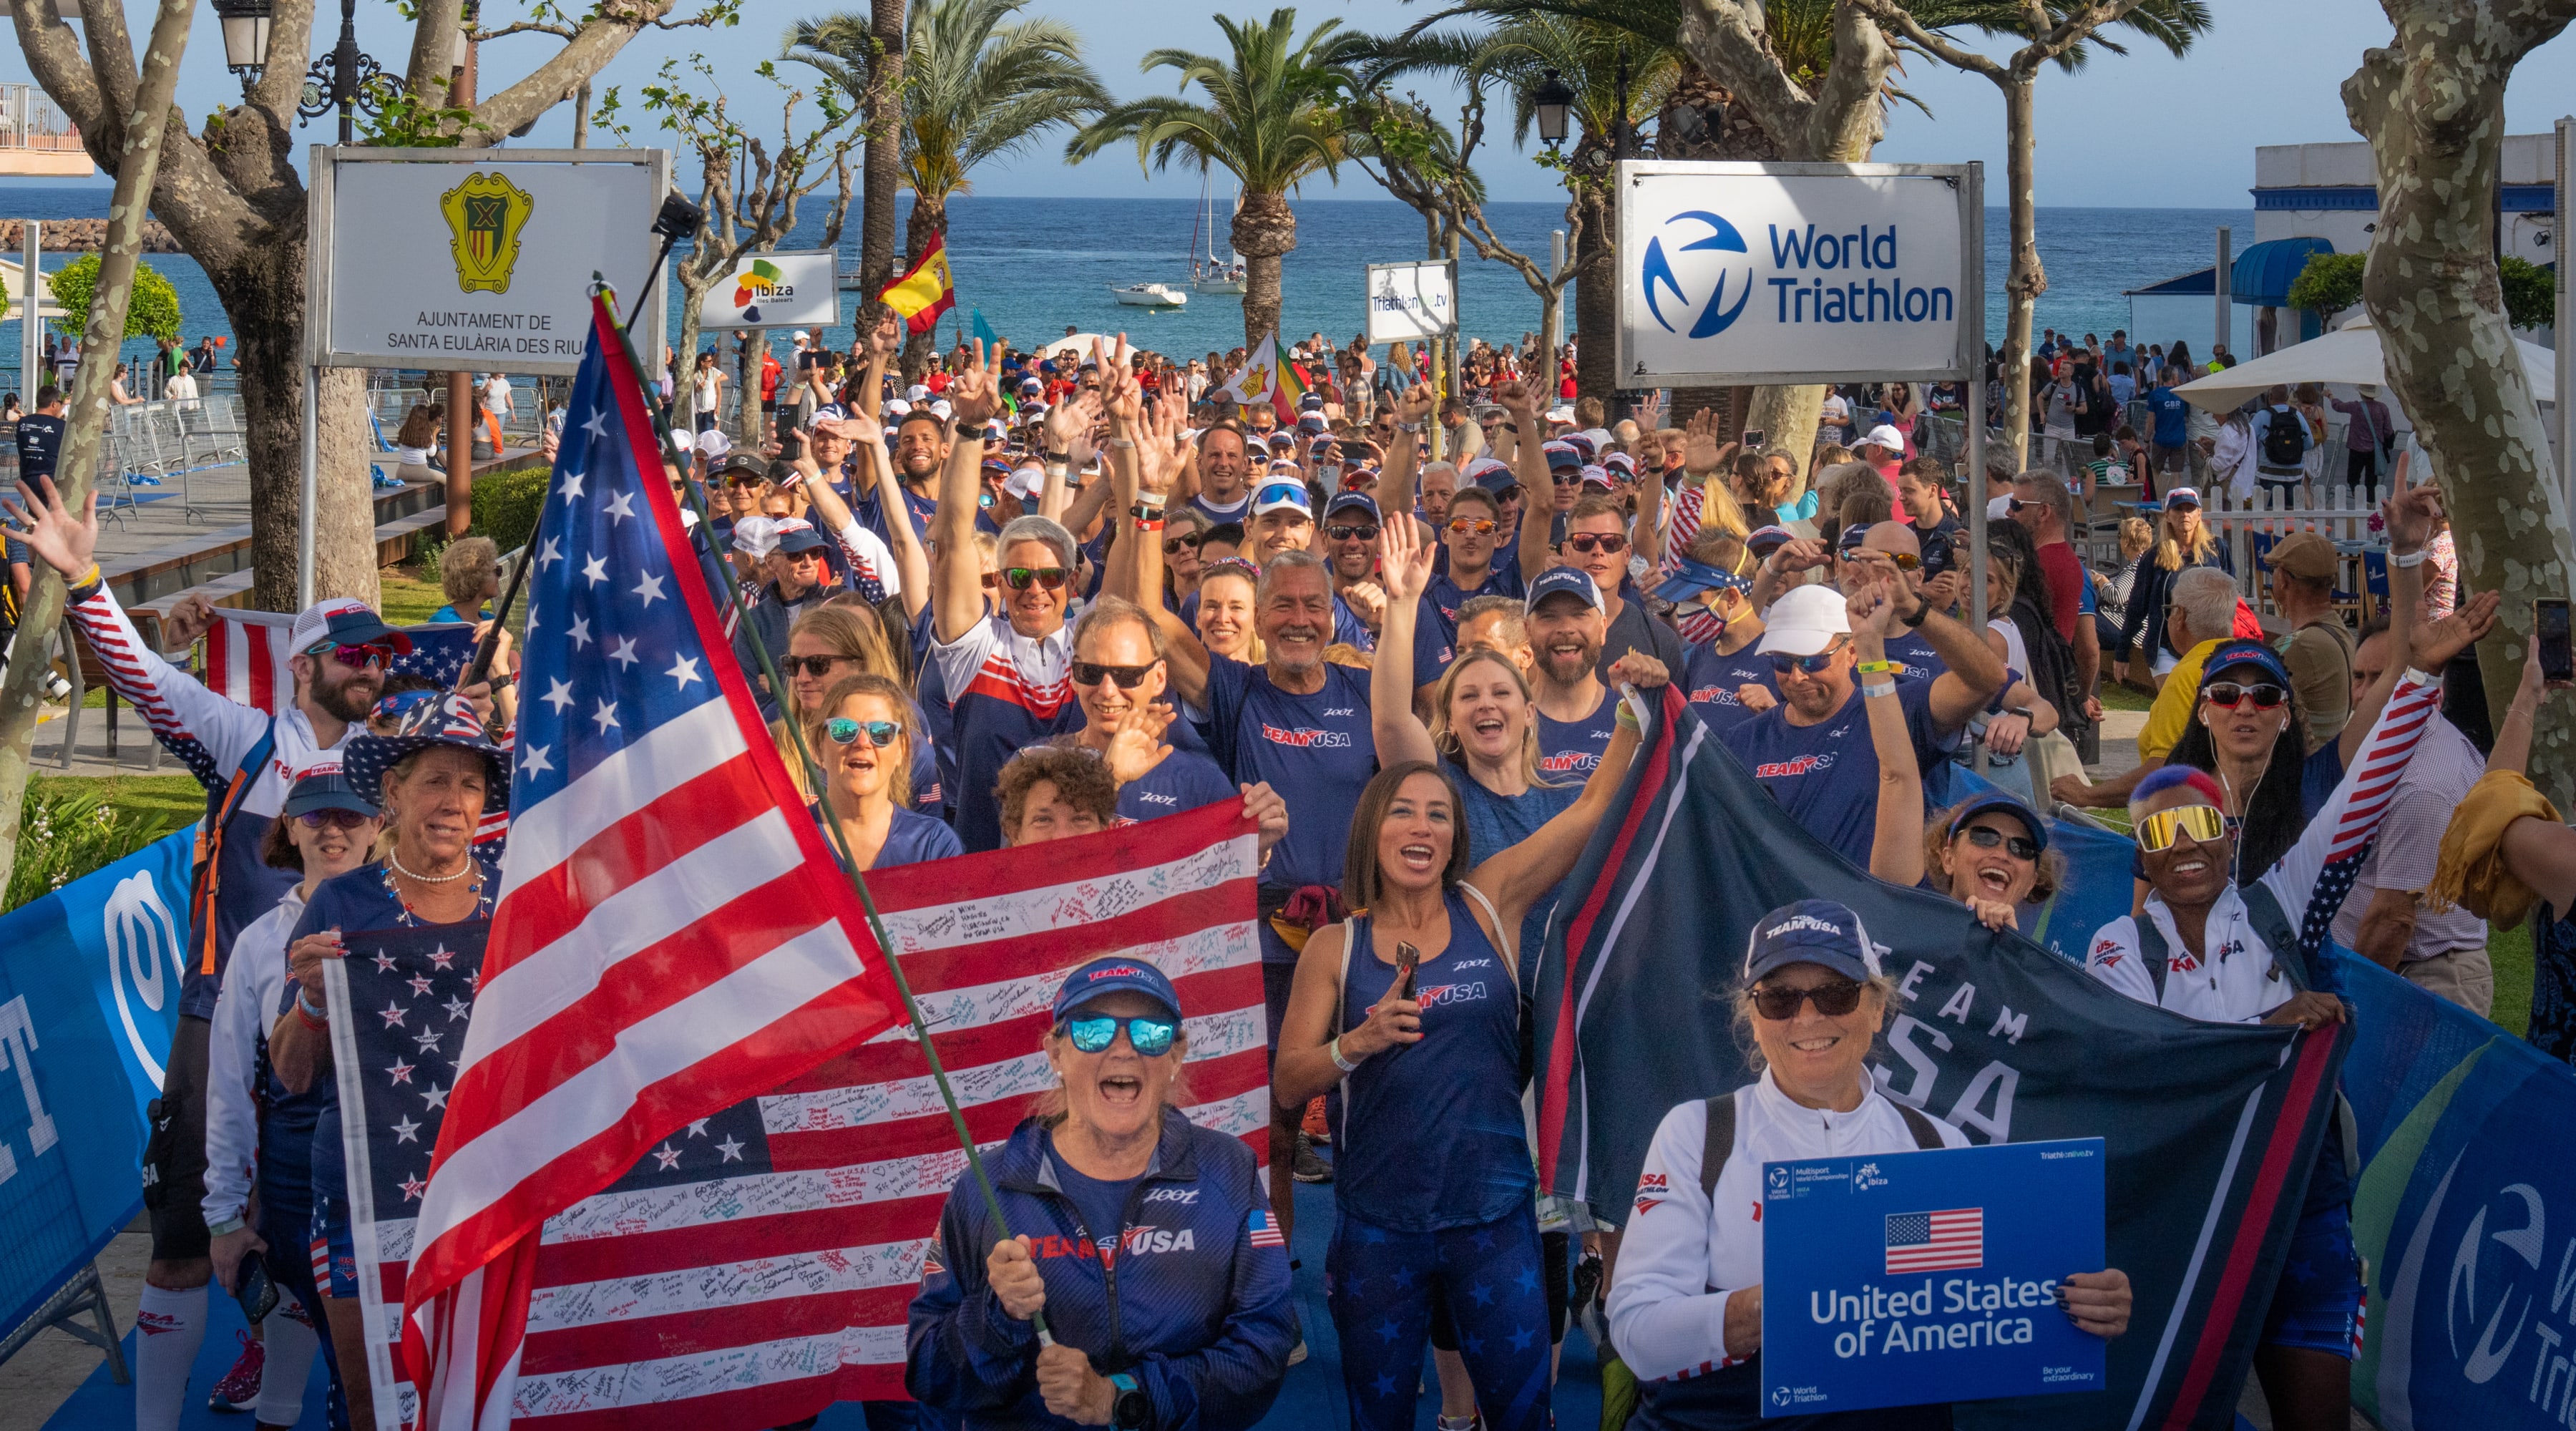 U.S. age group athletes wearing red, white and blue walk in a parade